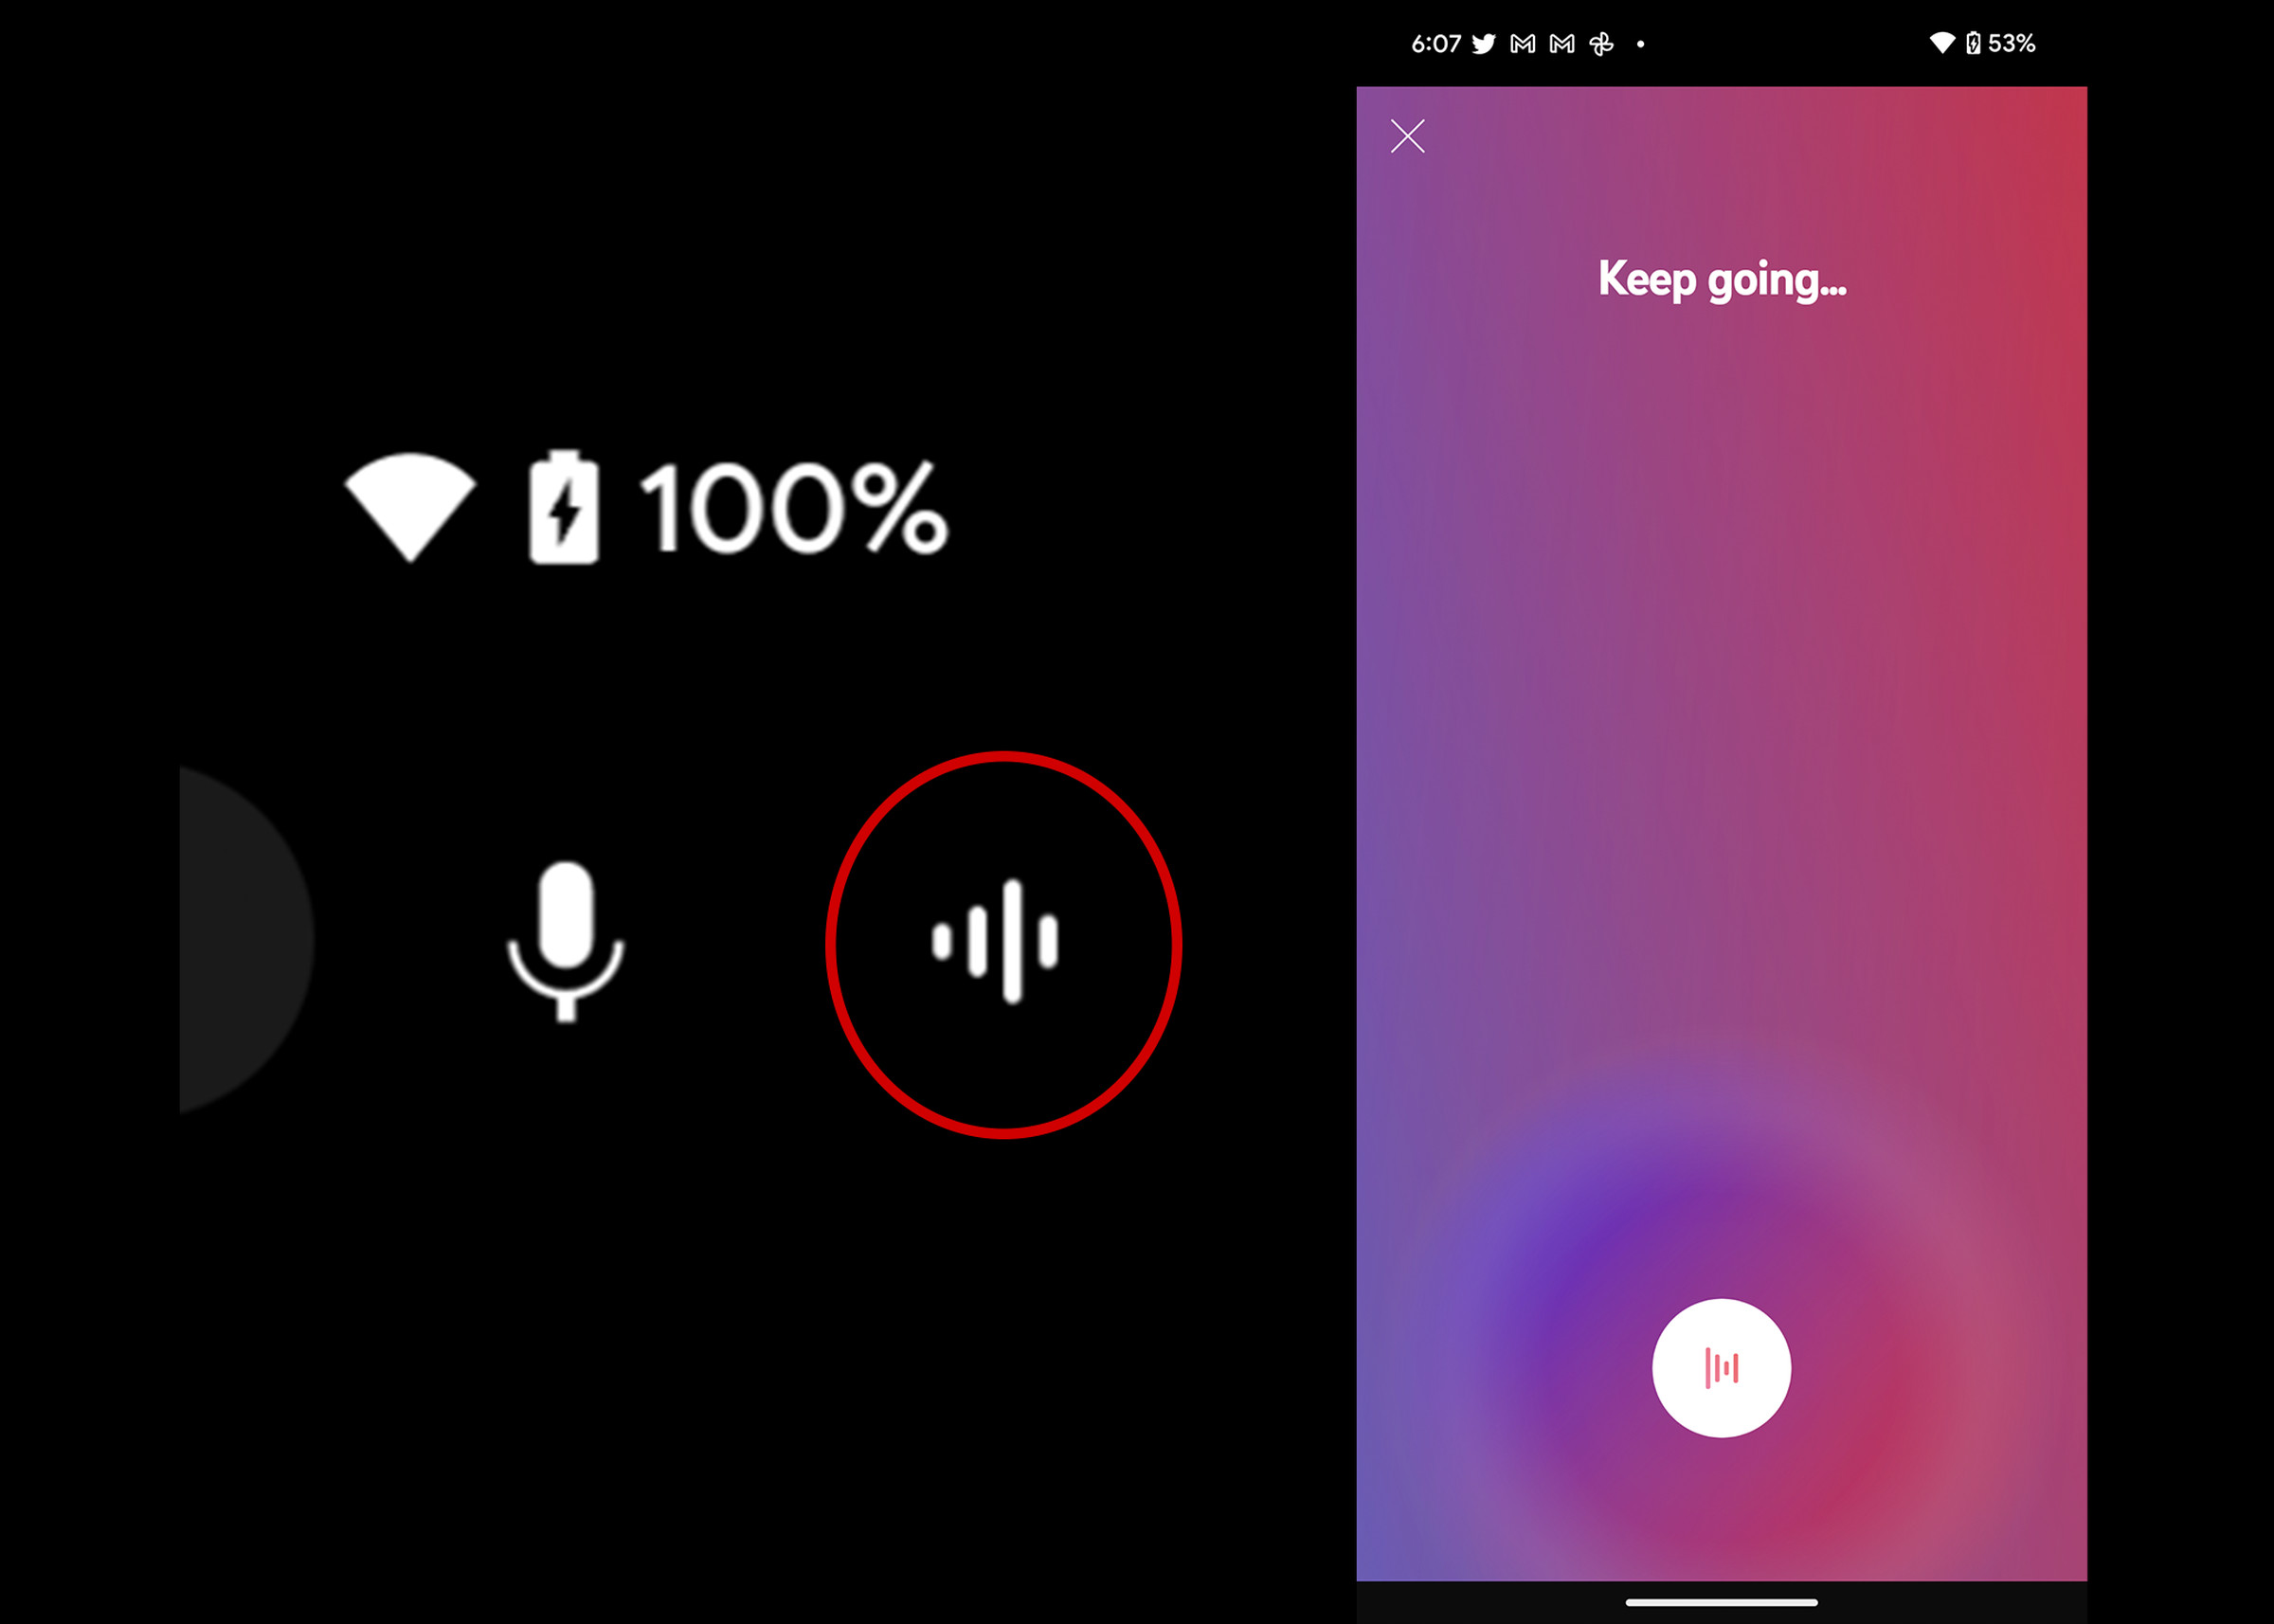 YouTube Music will let you search by humming into your Android phone